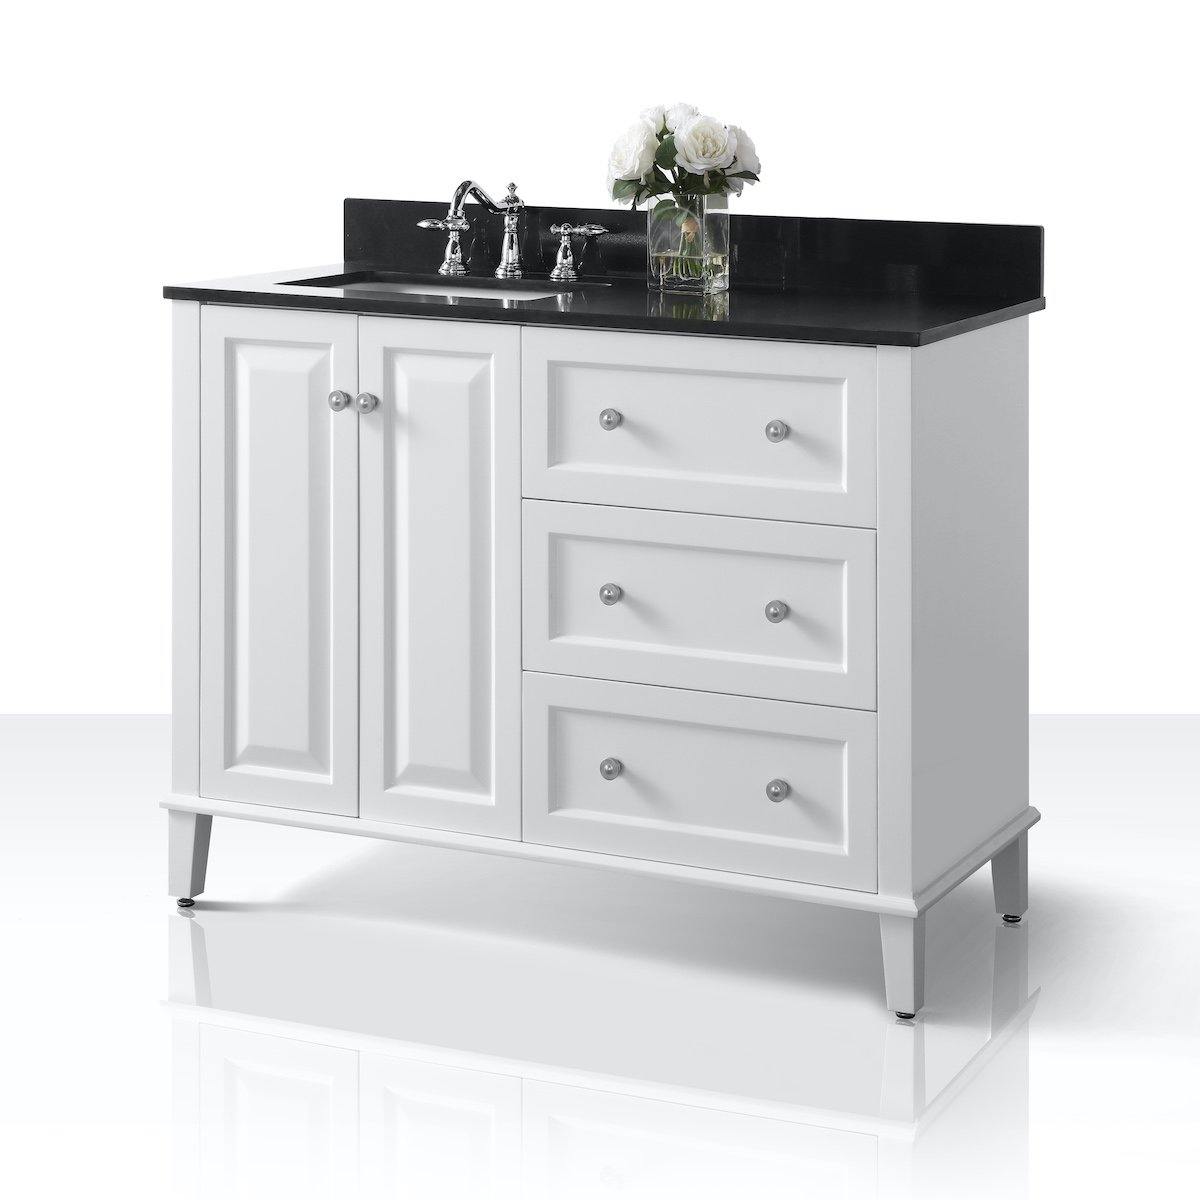 Ancerre Designs Hannah 48 Inch White Single Vanity with Left Basin and Nickel Hardware Side